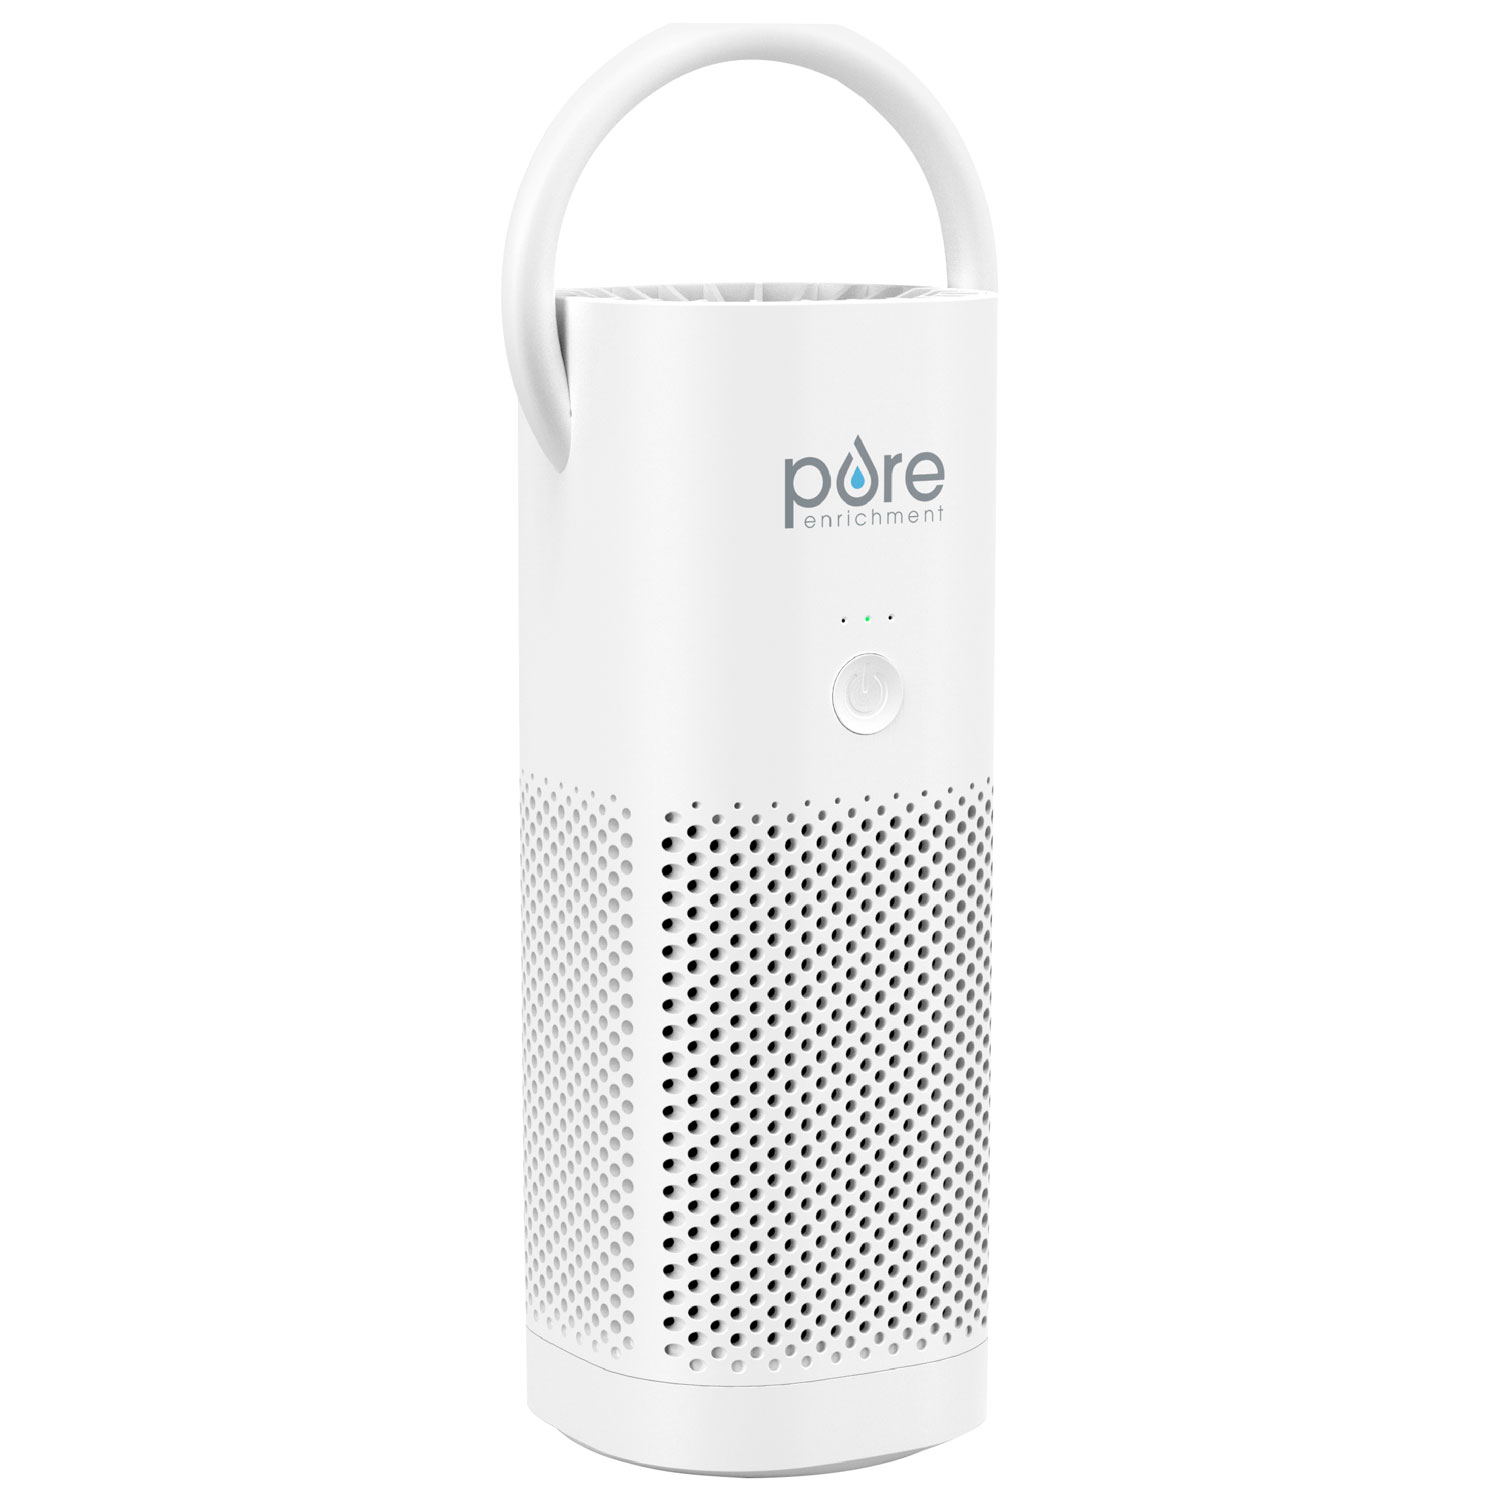 Pure Enrichment PureZone Portable Air Purifier with HEPA Filter - White